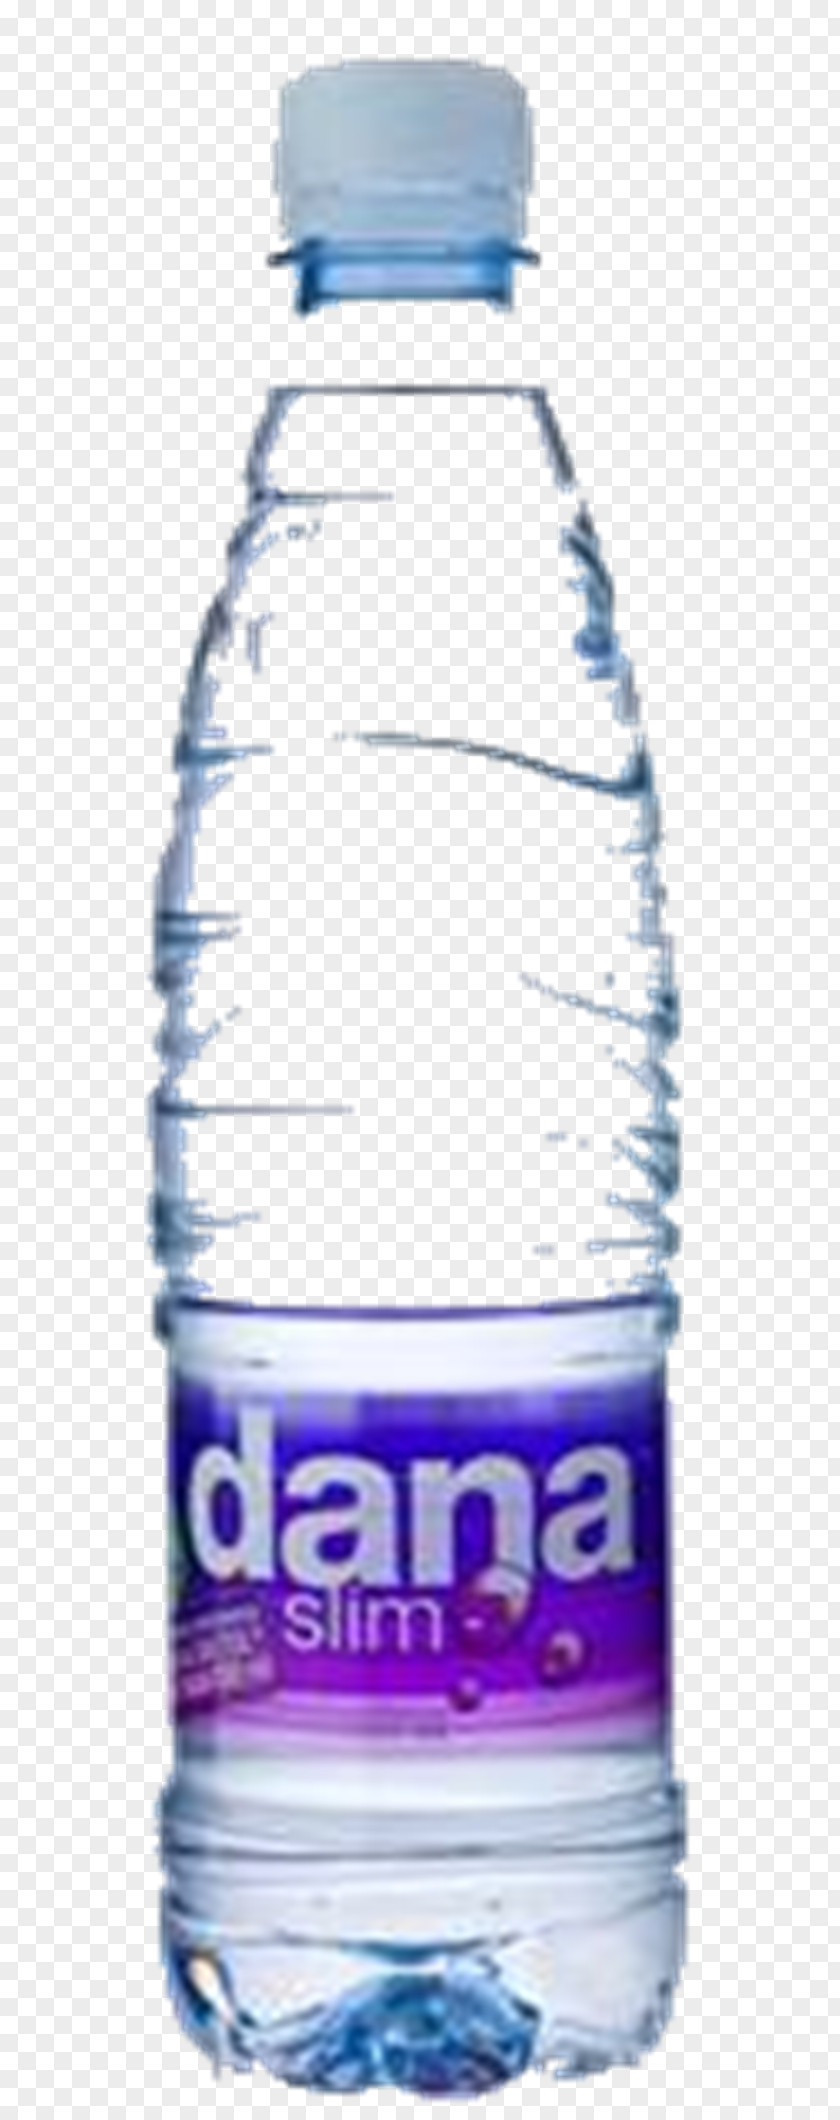 Coffee Mineral Water Bottles Drink PNG